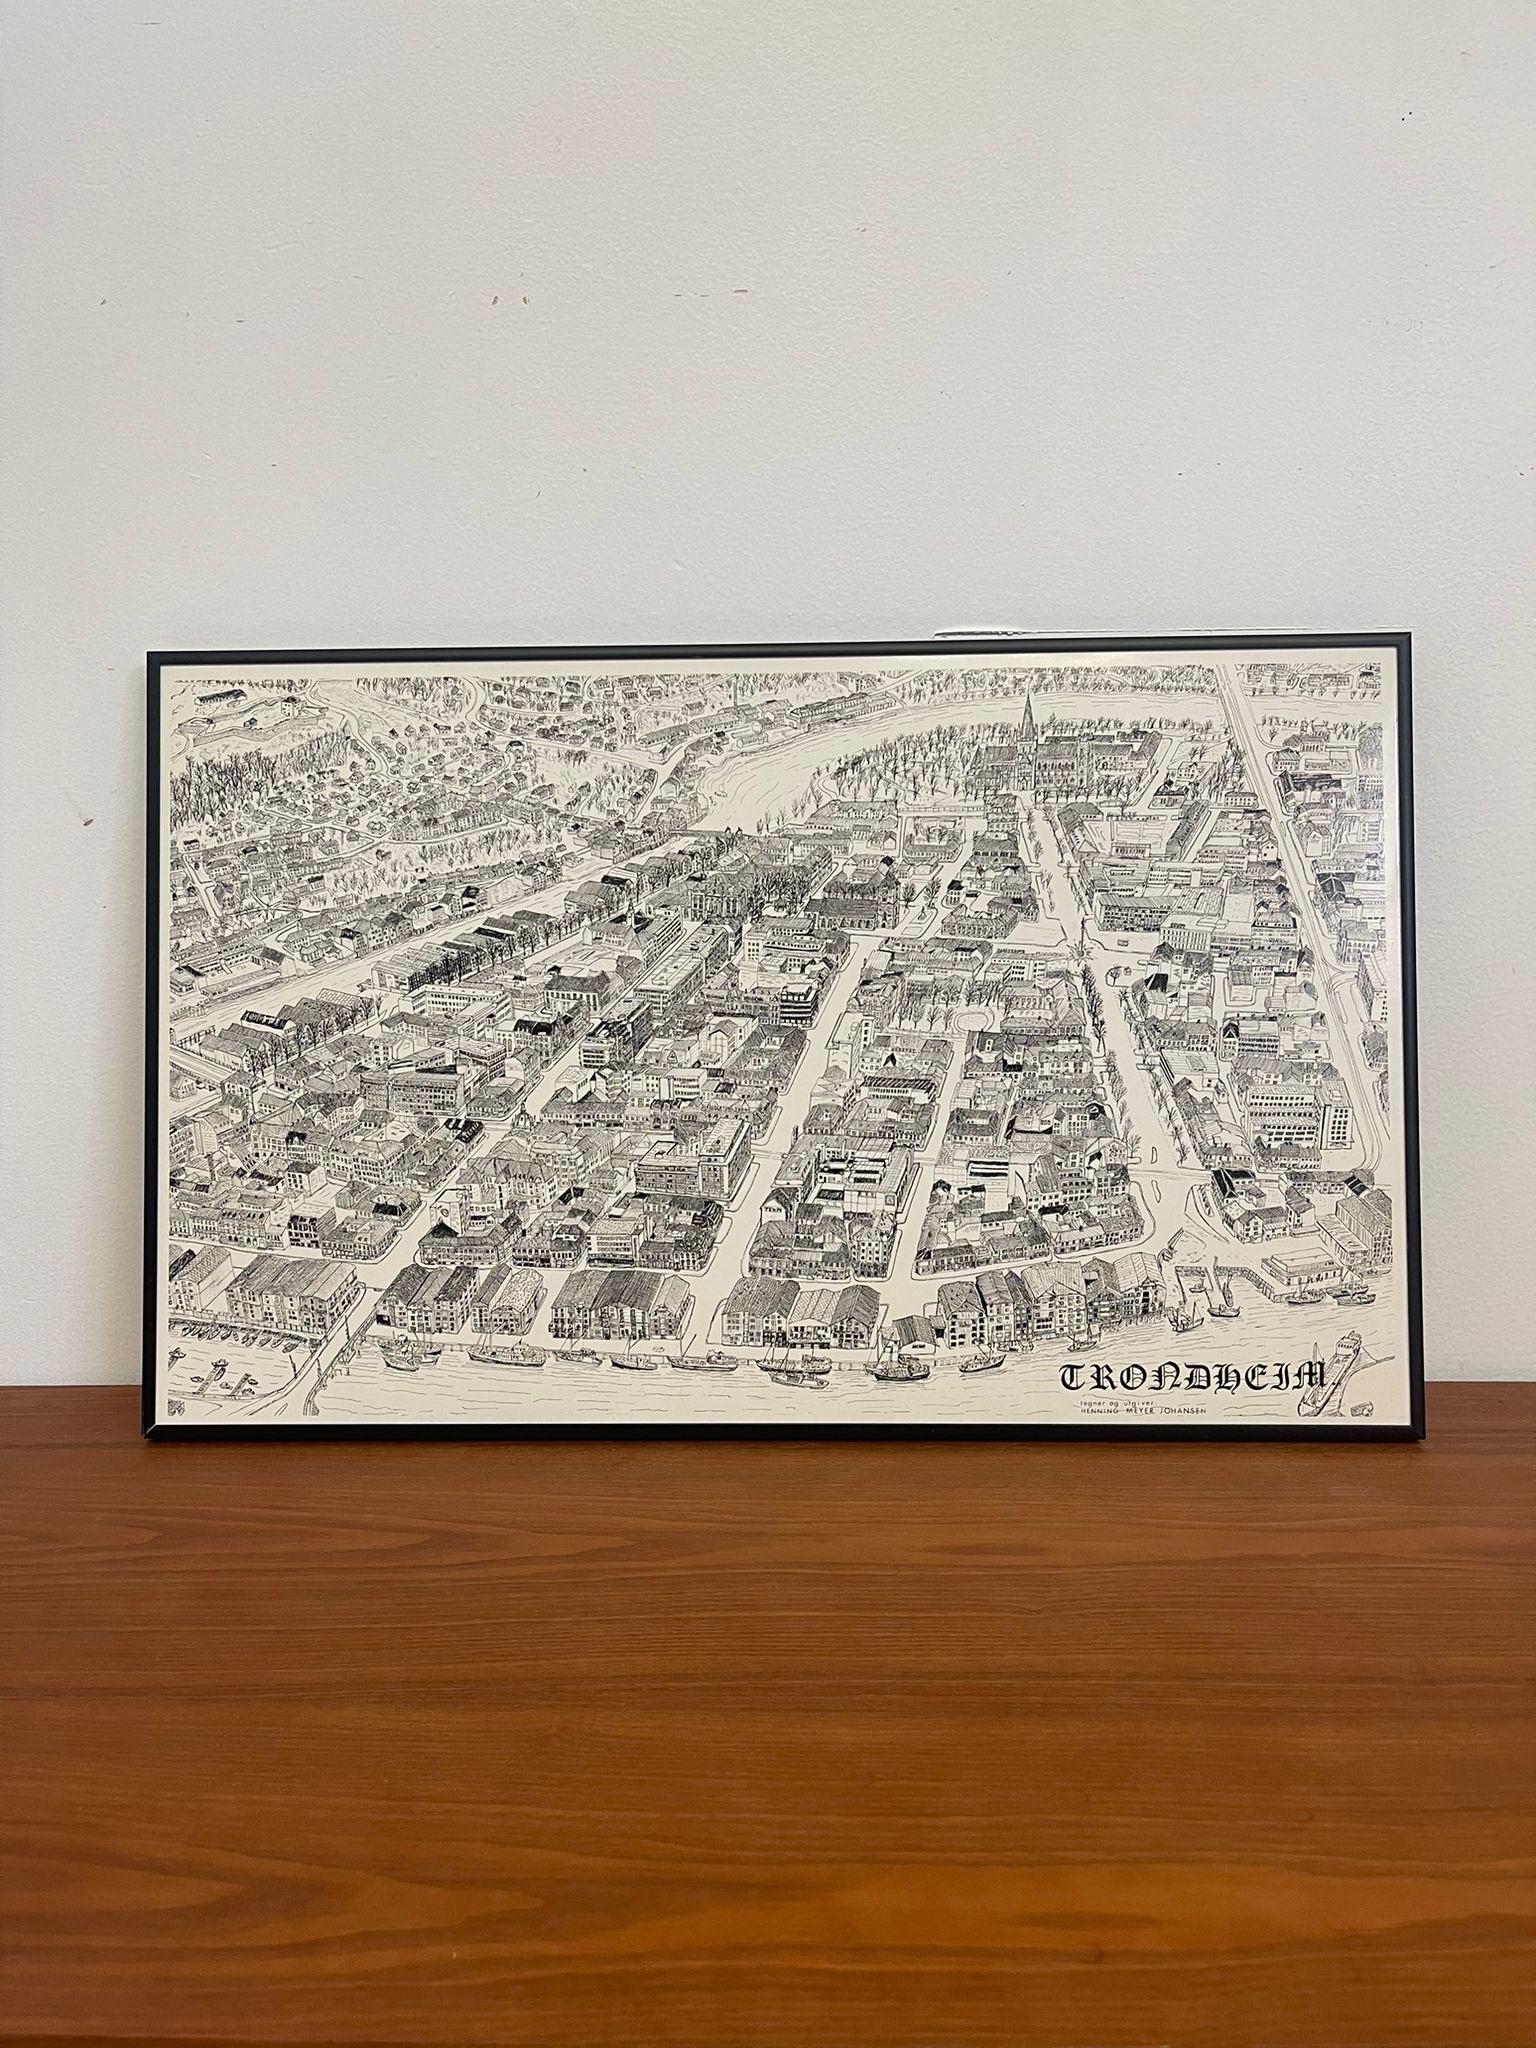 Vintage Illustration of Trondheim , City of Norway. Frame has Makers Mark on the Back. Vintage Condition Consistent with Age as Pictured.

Dimensions. 25 1/2 W ; 1/4 D ; 16 H